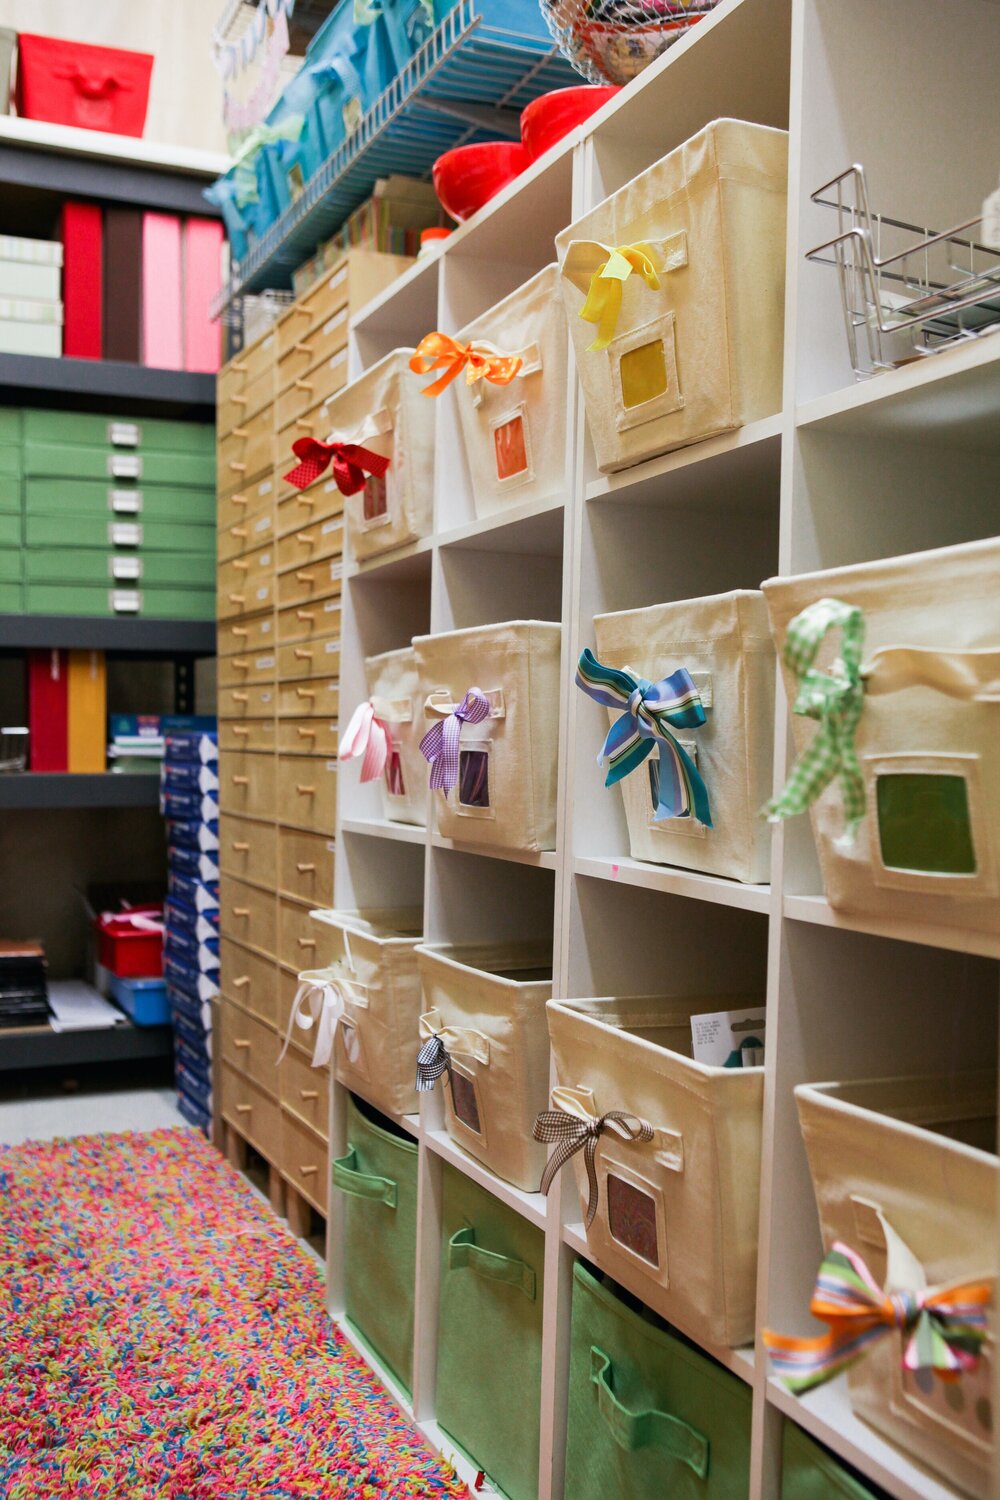 This image of my storage room—which sits behind my creative studio—is not up to date, but still reflects the shelves that hold bins of scrapbook embellishments, stored by COLOR.